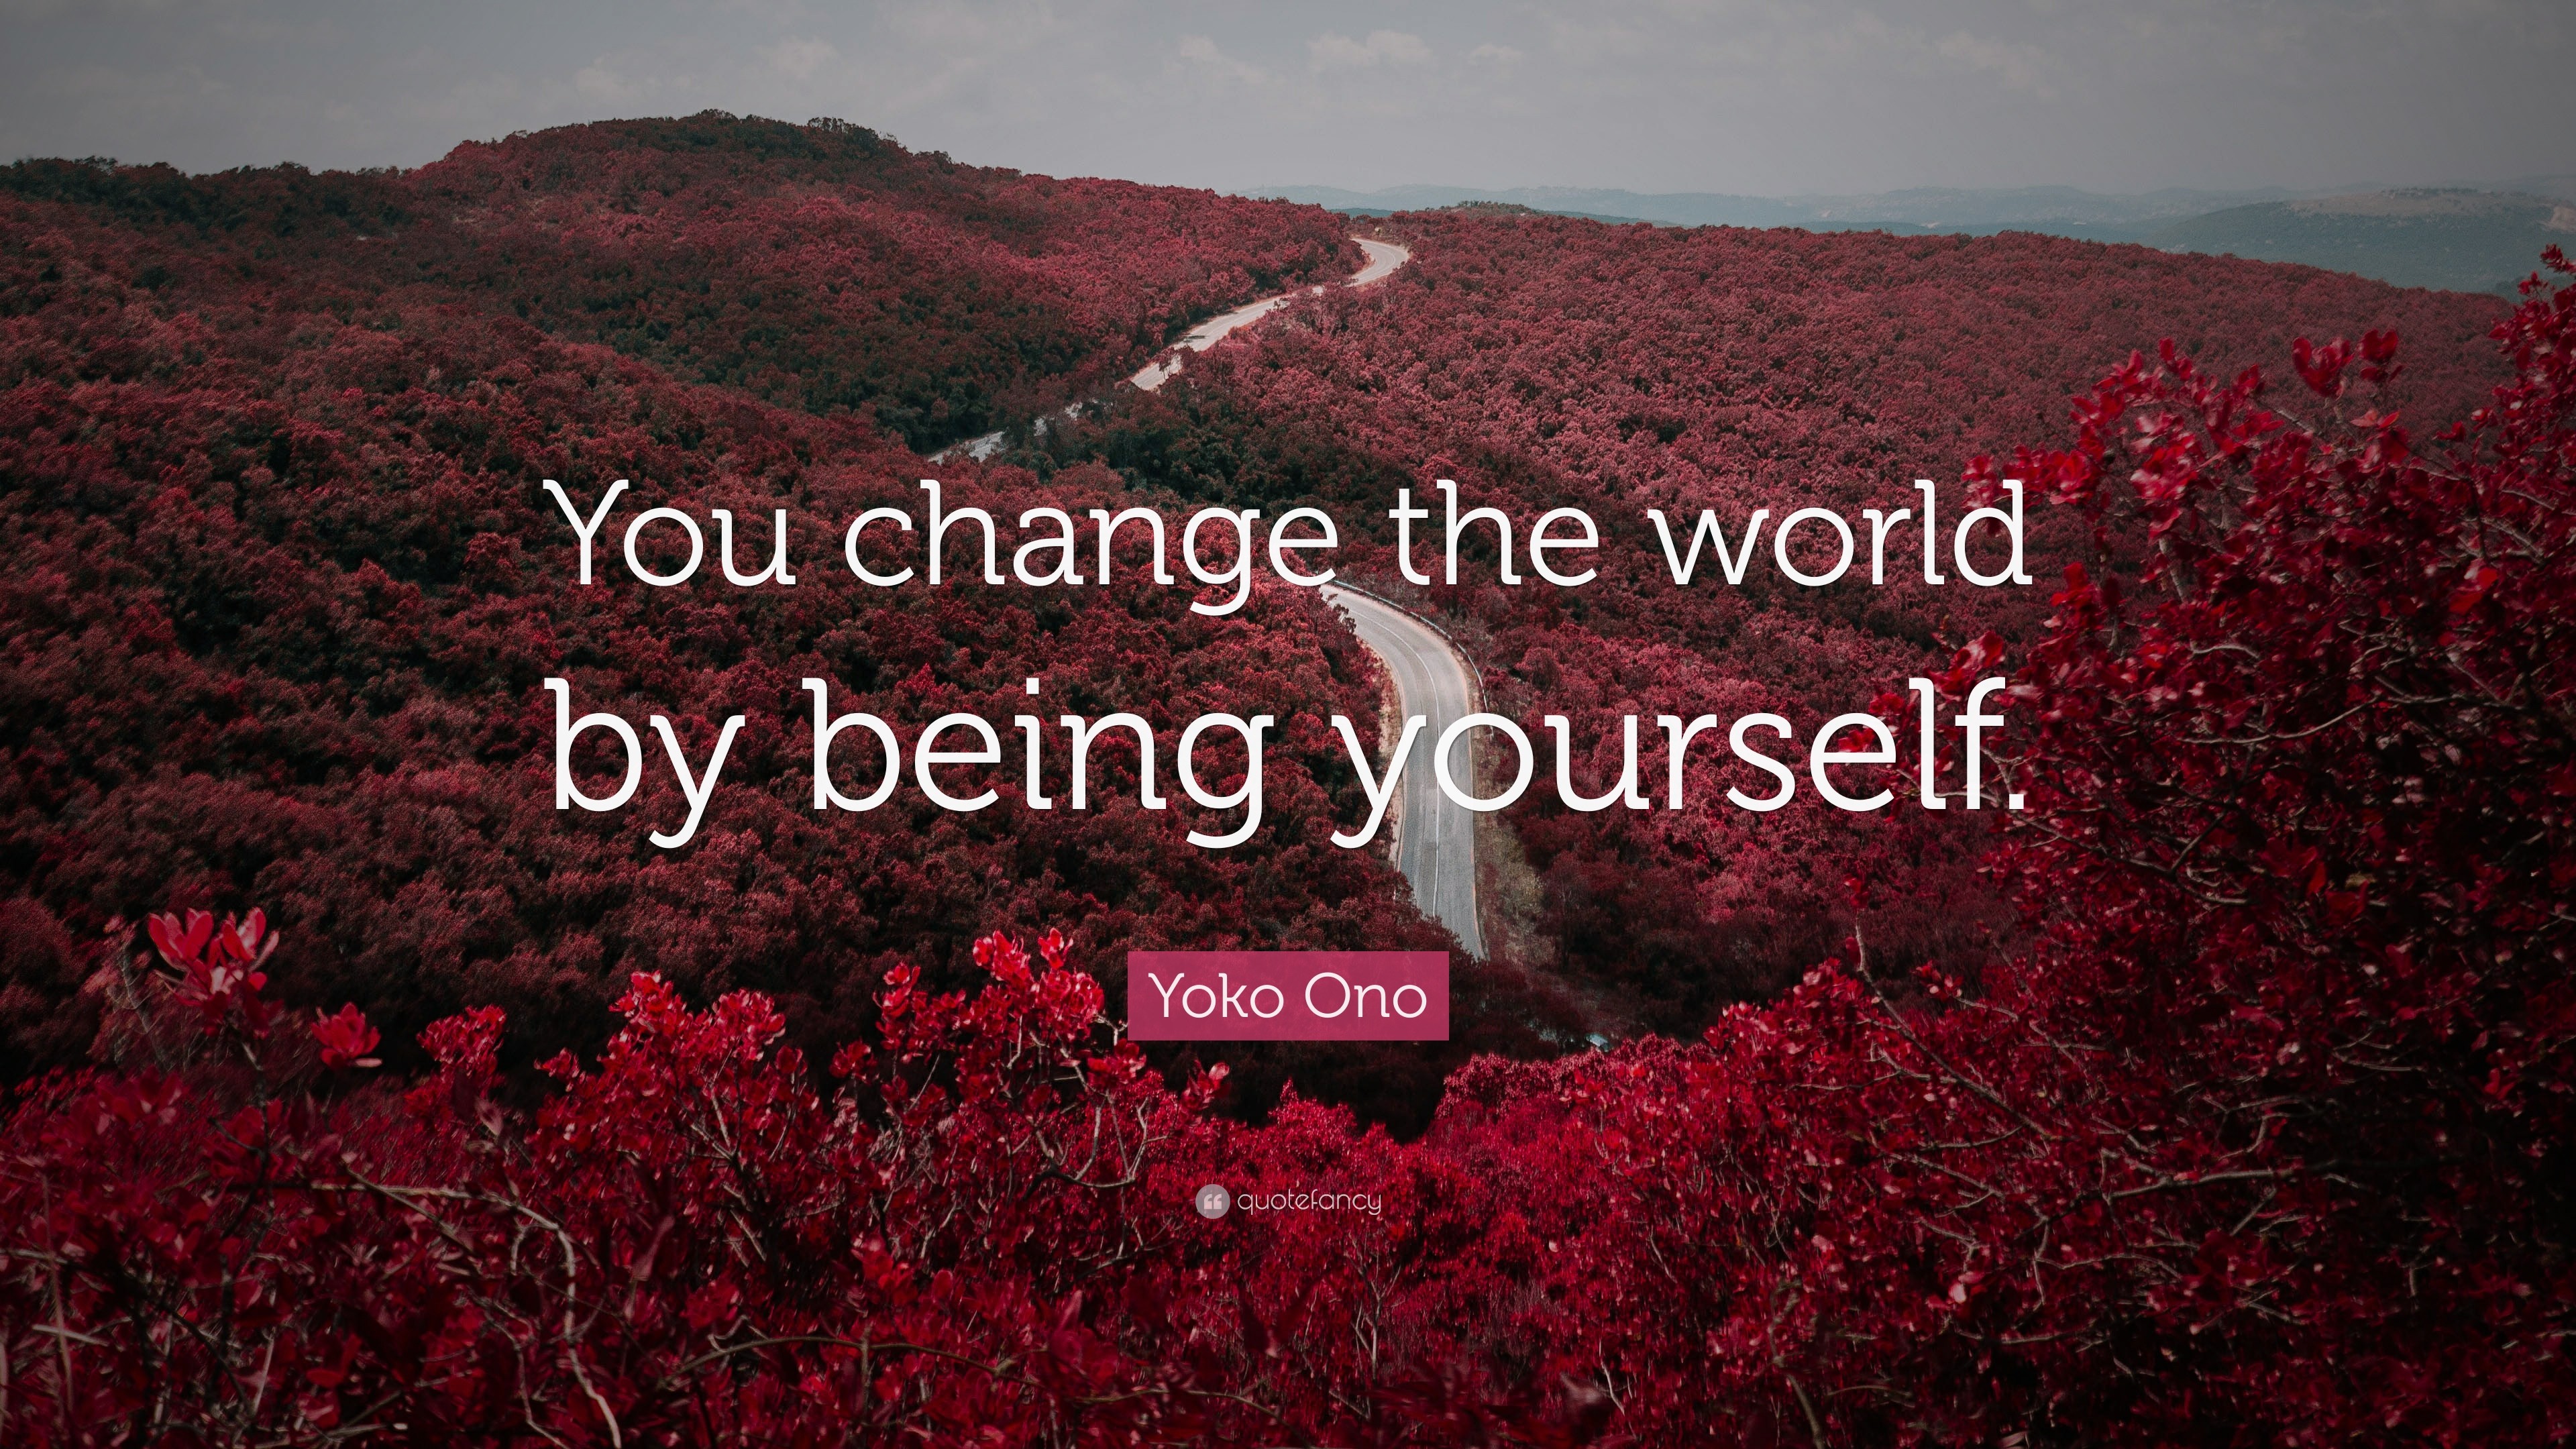 Yoko Ono Quote: "You change the world by being yourself." 